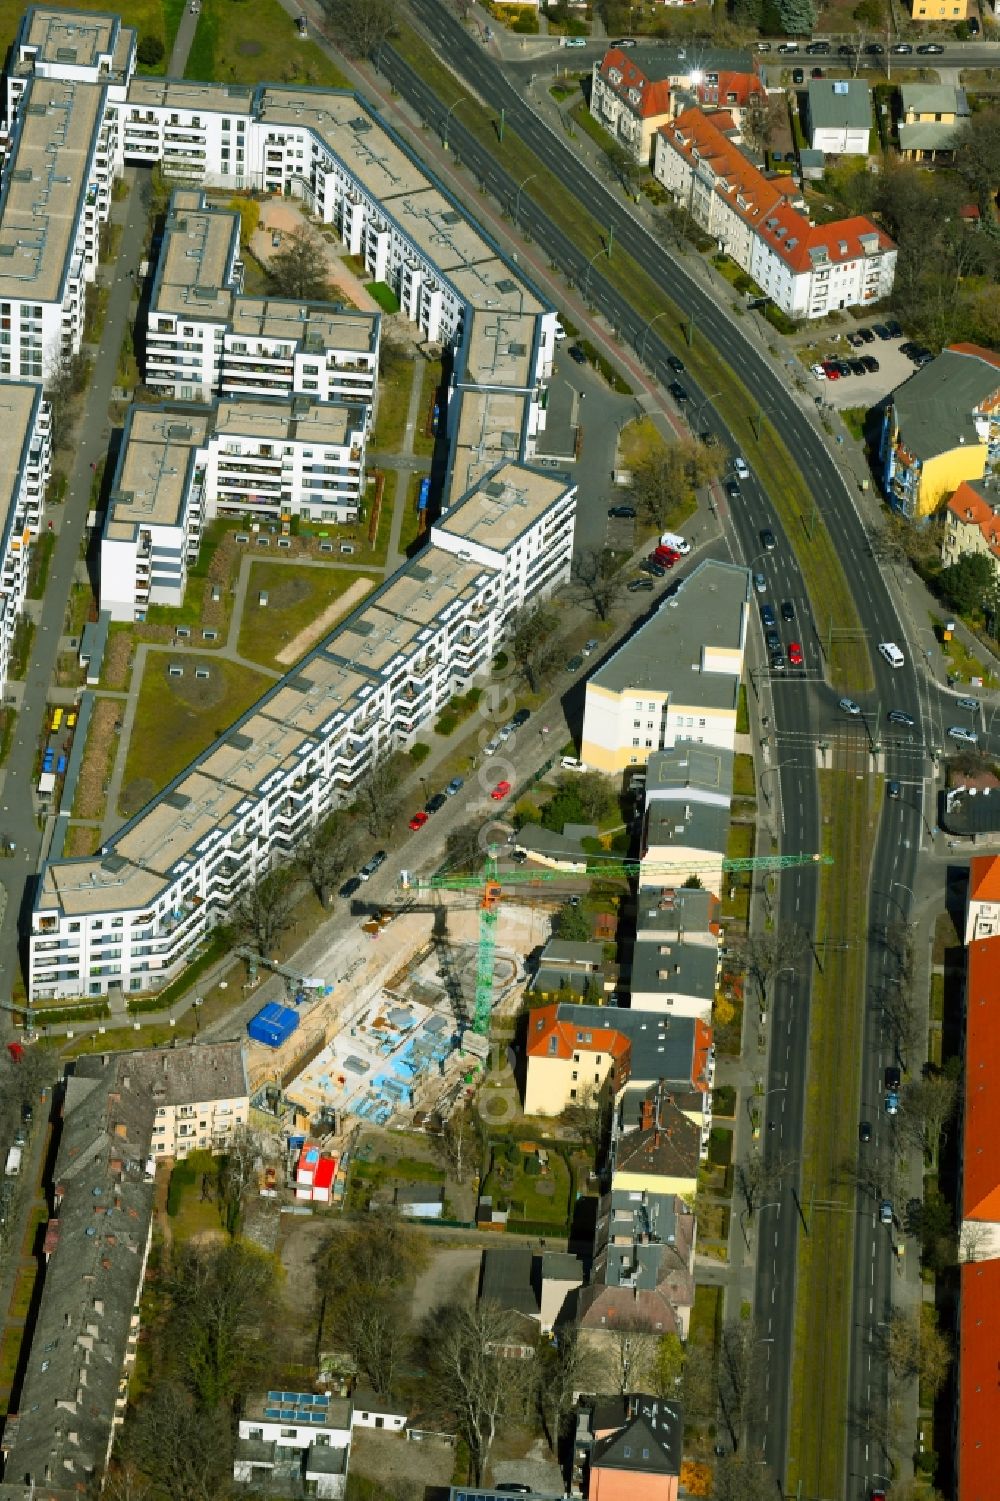 Aerial image Berlin - Construction site for the multi-family residential building of the project KARL IM GLUeCK on Hoenower Strasse in the district Karlshorst in Berlin, Germany